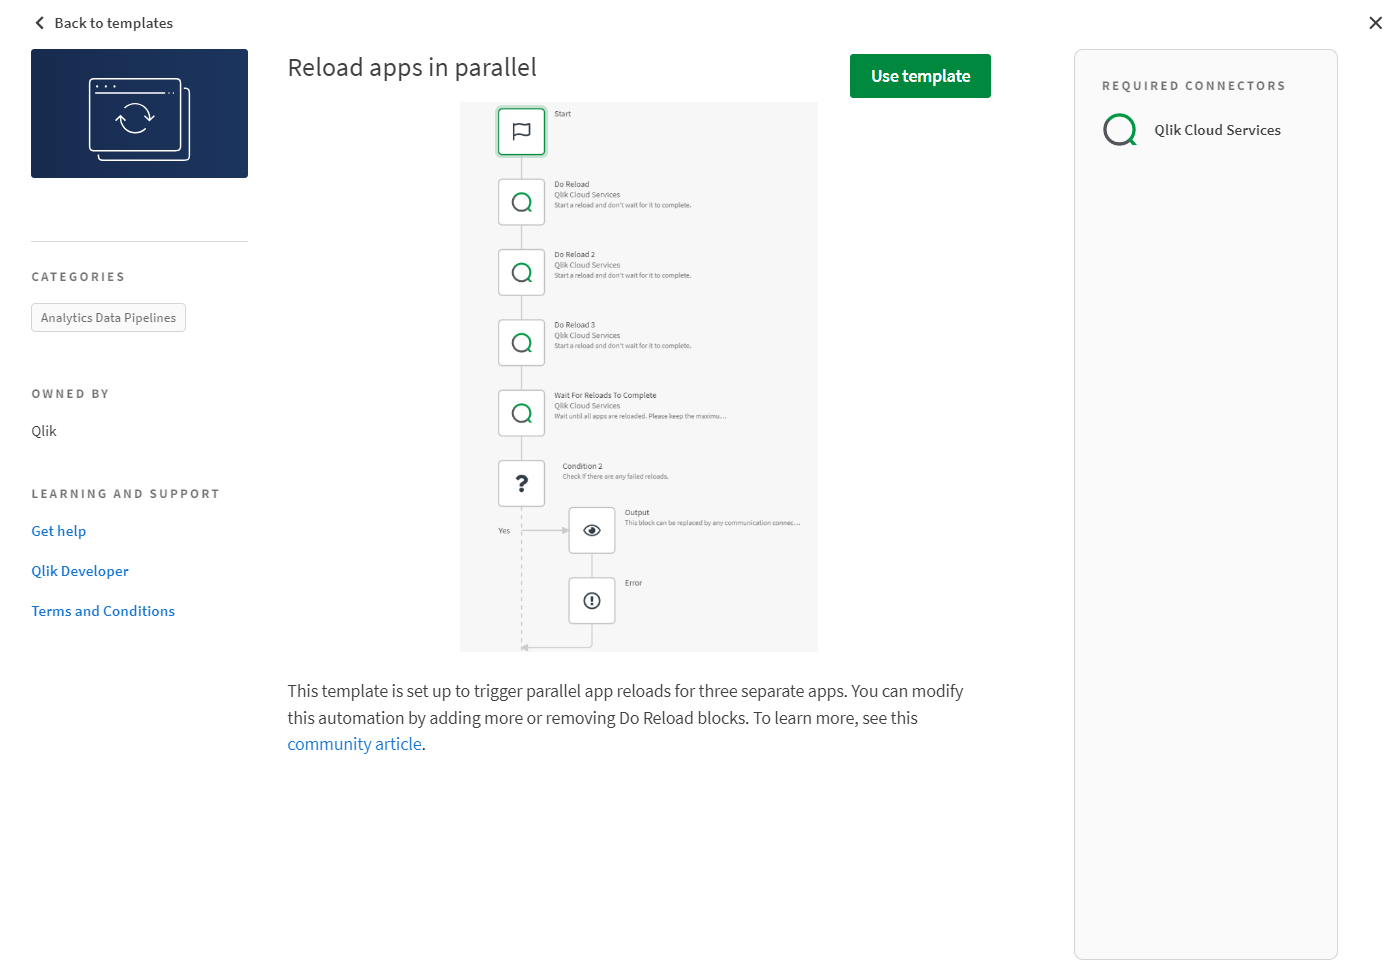 Details page for the reload apps in parallel template